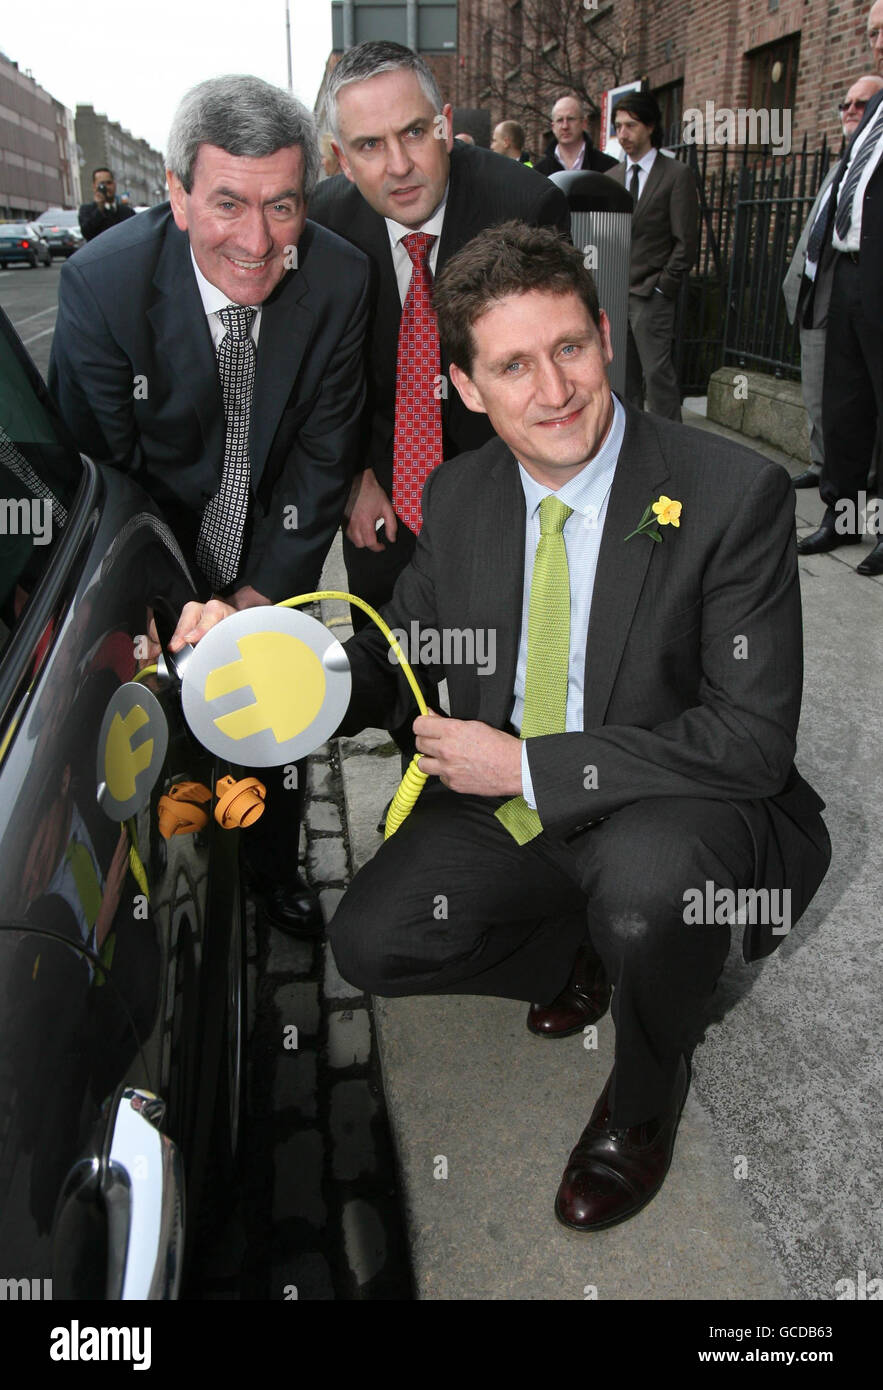 The first electric vehicle charge points in Ireland are officially launched by (left to right) ESB chief executive Padraig McManus, Paul Mulvaney, Managing Director, ESB Electric Vehicles and Minister for Communications, Energy and Natural Resources Eamon Ryan (front) in Dublin. Stock Photo